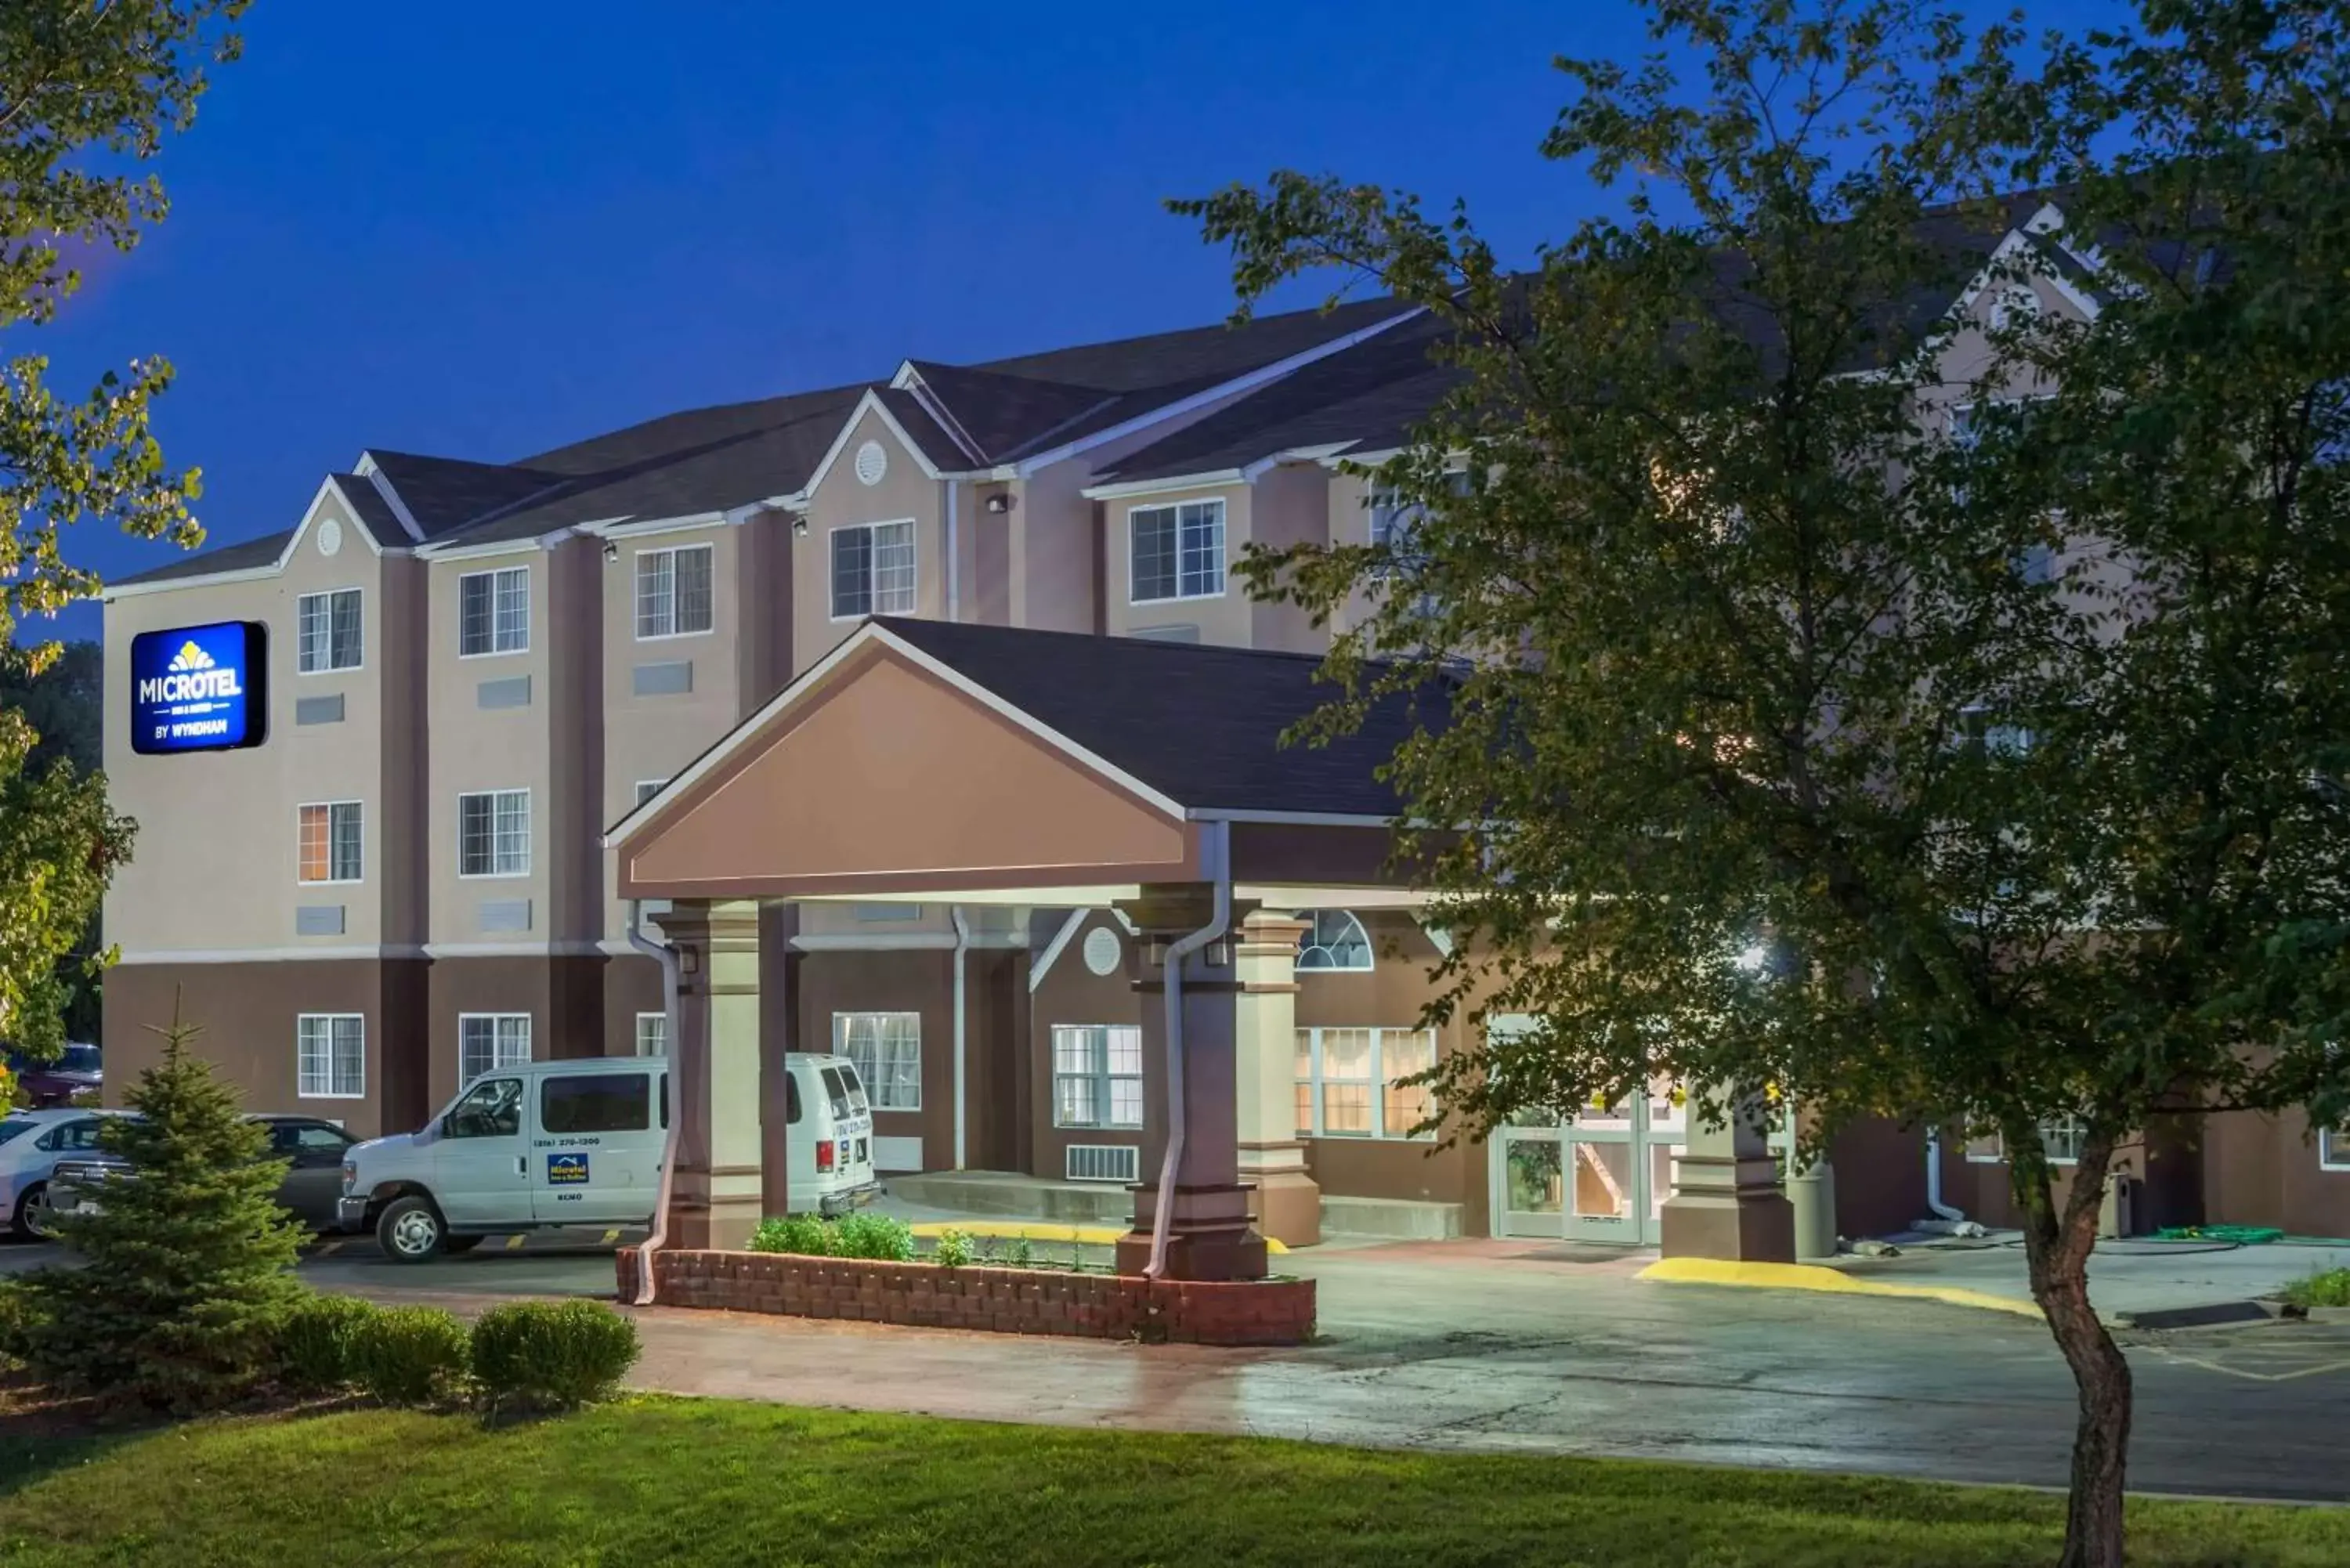 Property Building in Microtel Inn & Suites by Wyndham Kansas City Airport